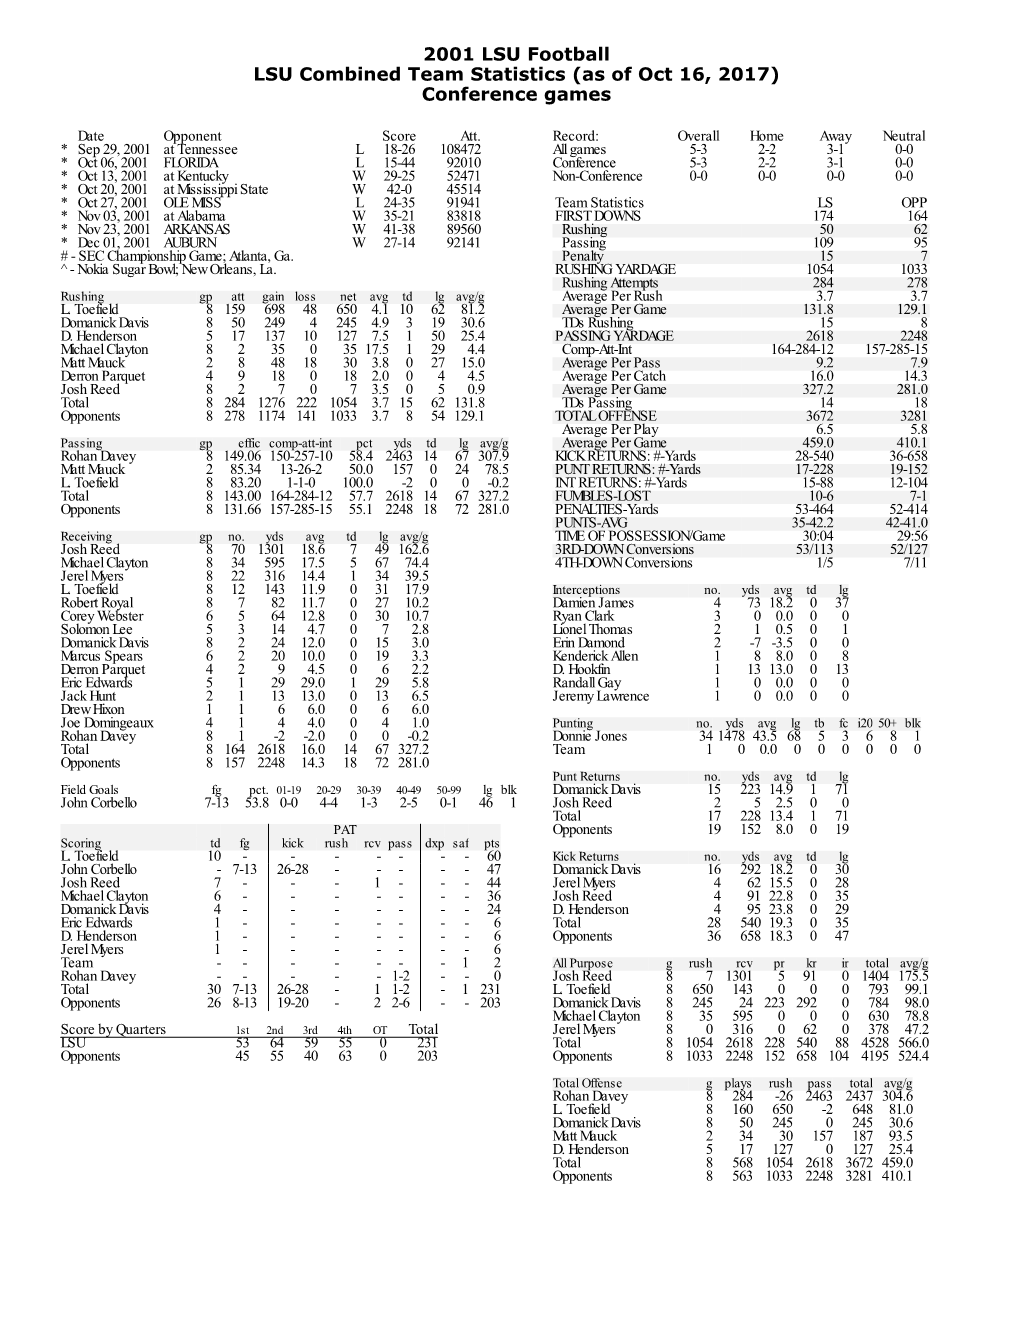 2001 LSU Football LSU Combined Team Statistics (As of Oct 16, 2017) Conference Games